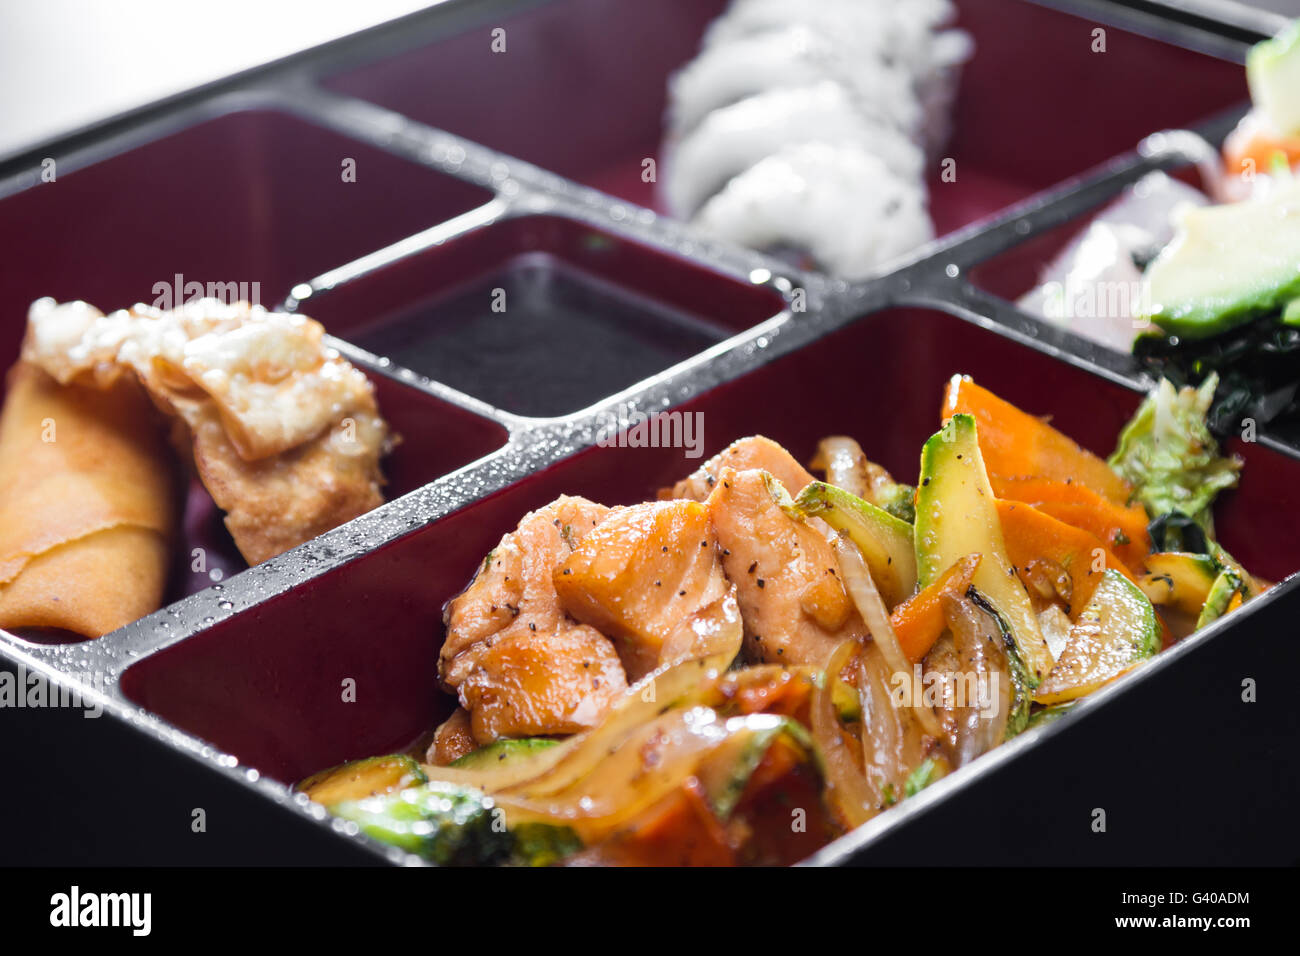 delicious meal prepared and presented restaurant style with fresh ingredients pre served as a on the go lunch choice Stock Photo